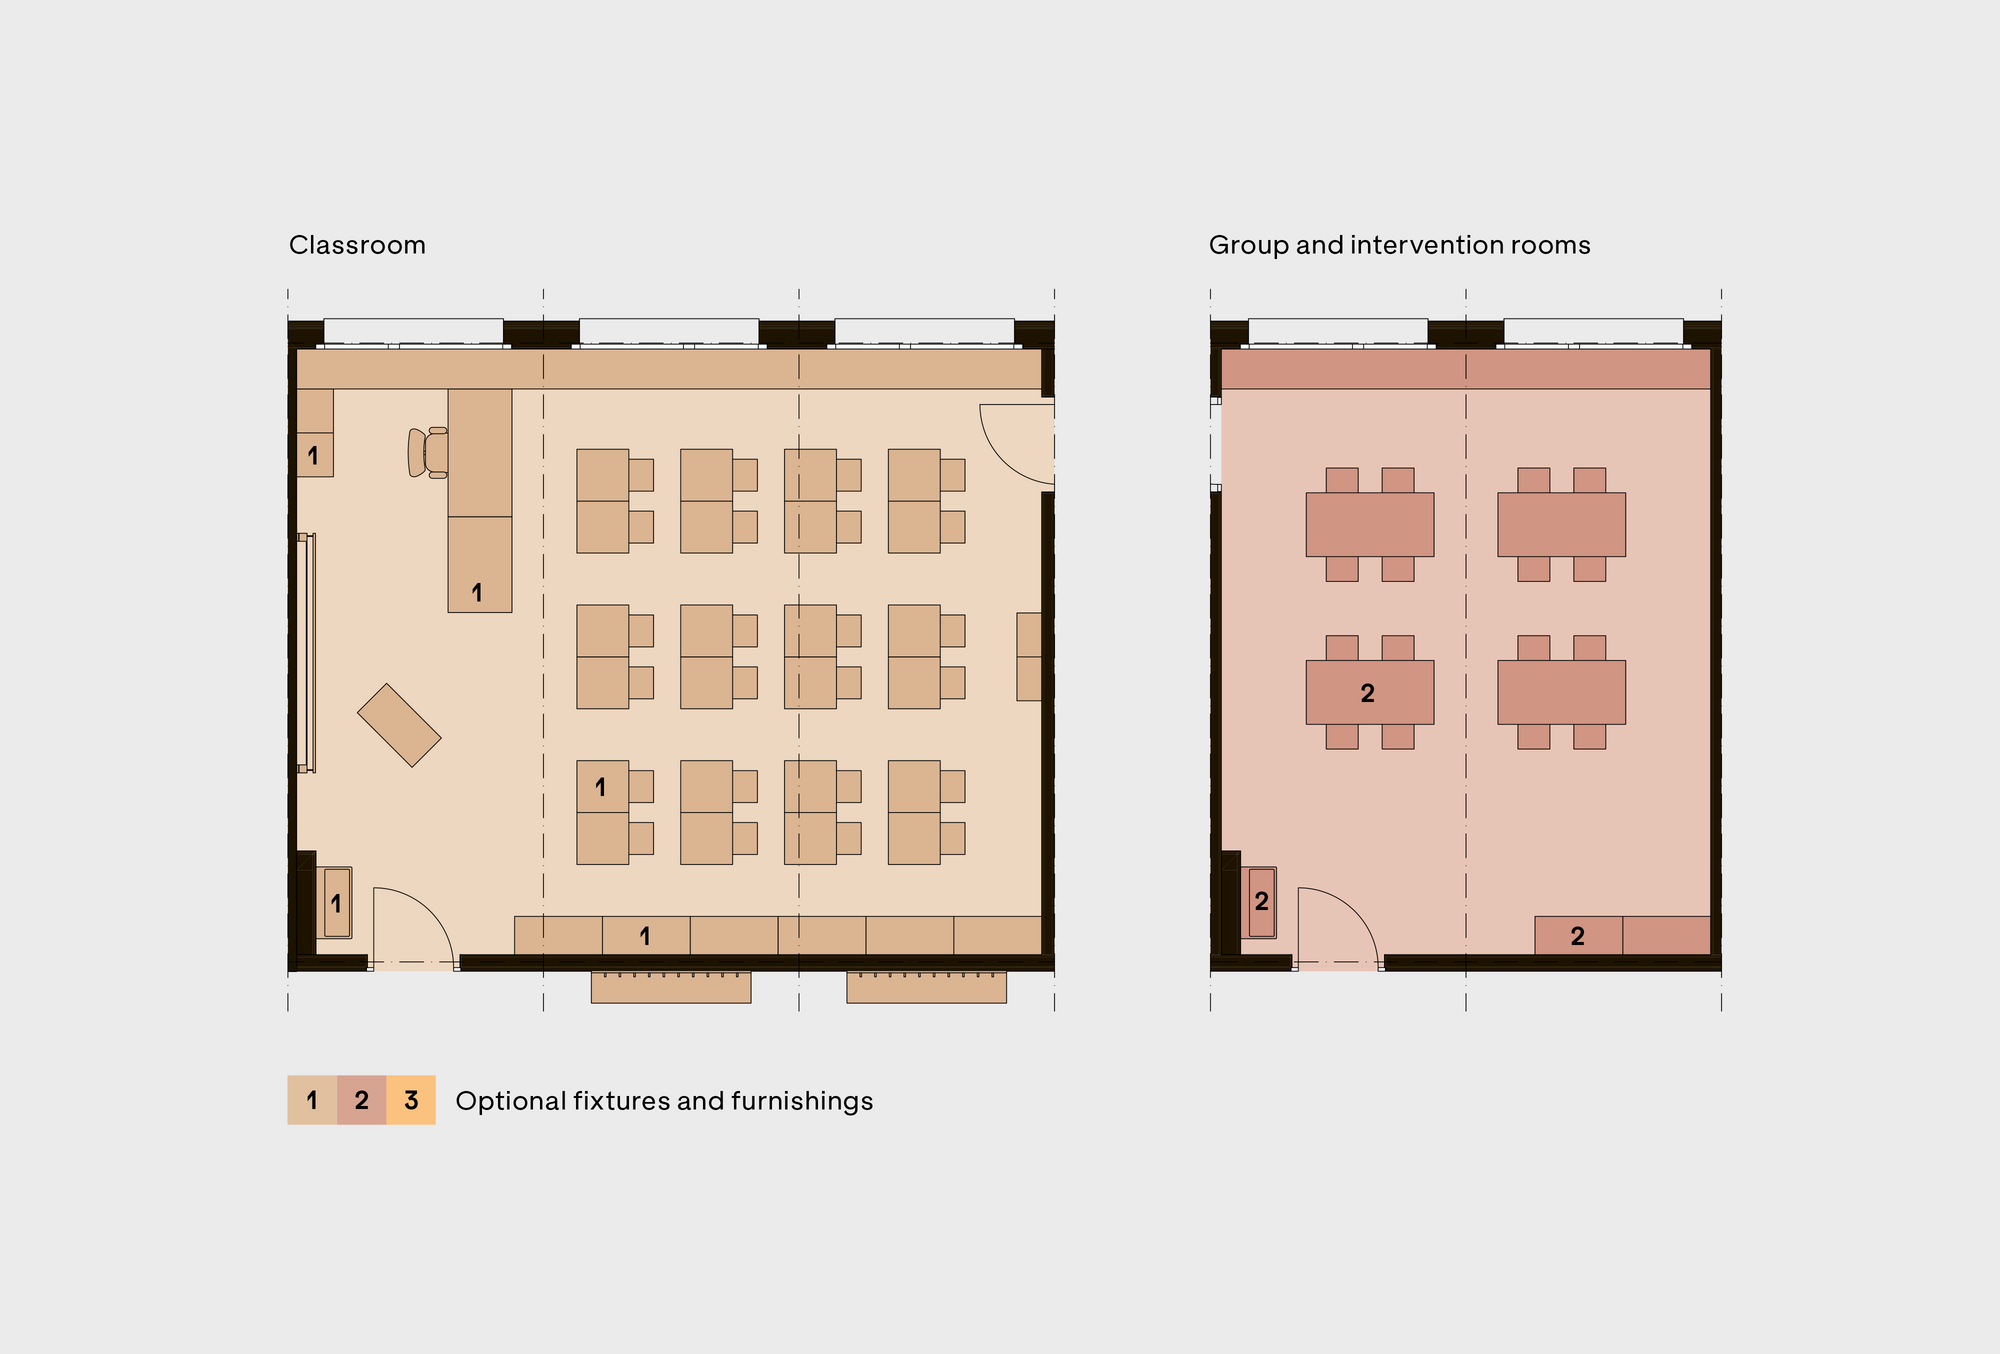 Primary spaces with classrooms, group/intervention rooms as fixed room units in the layout